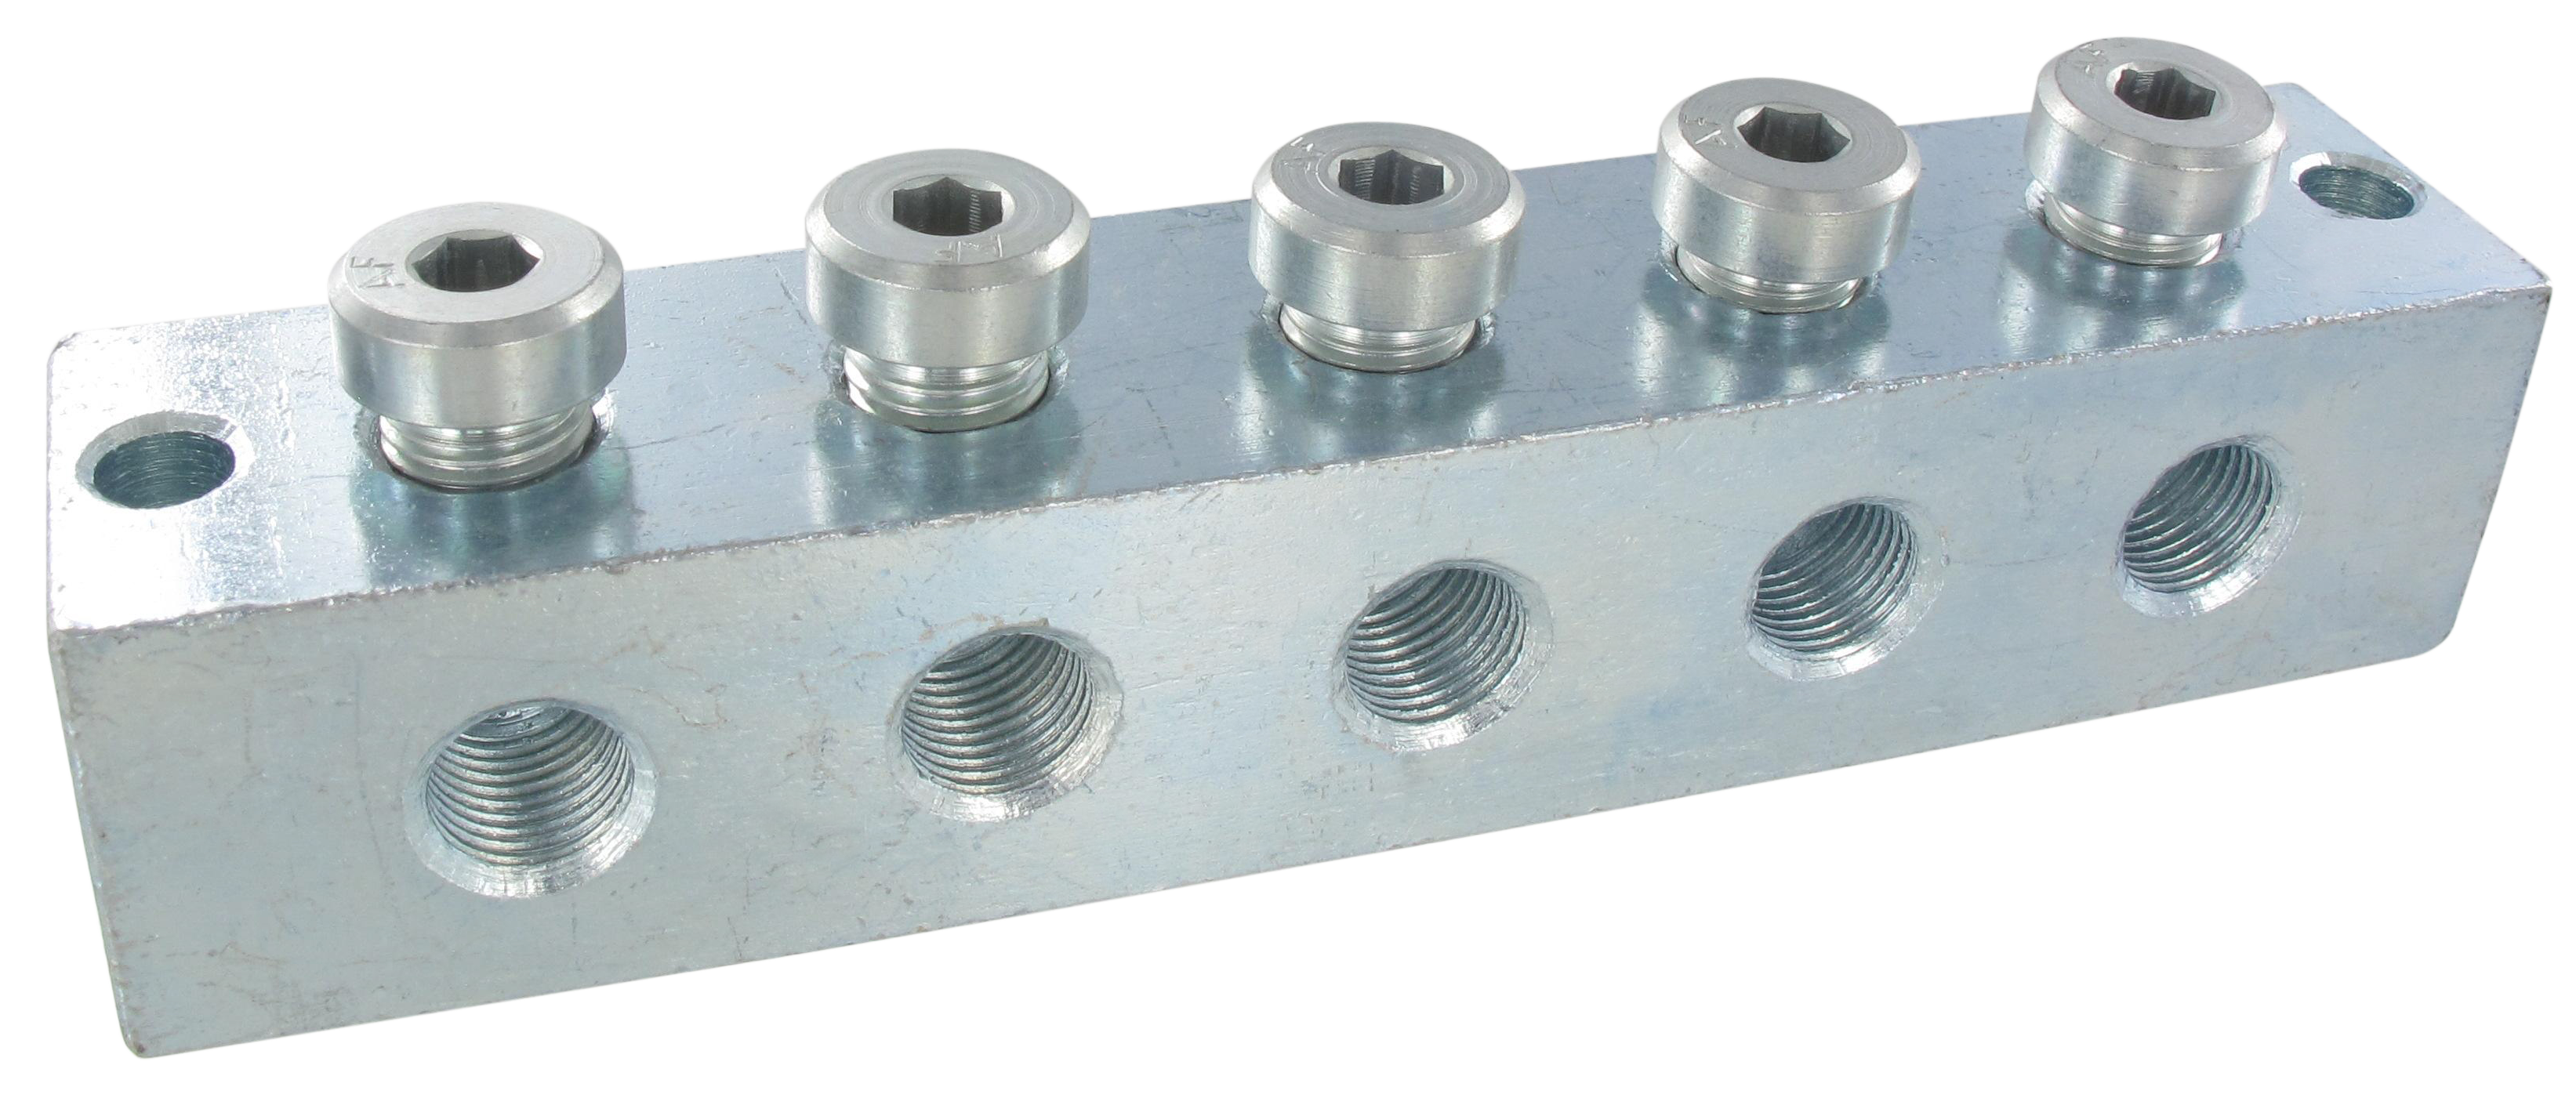 Threaded T-connector manifold M10x1 with 3 connections in galvanised steel